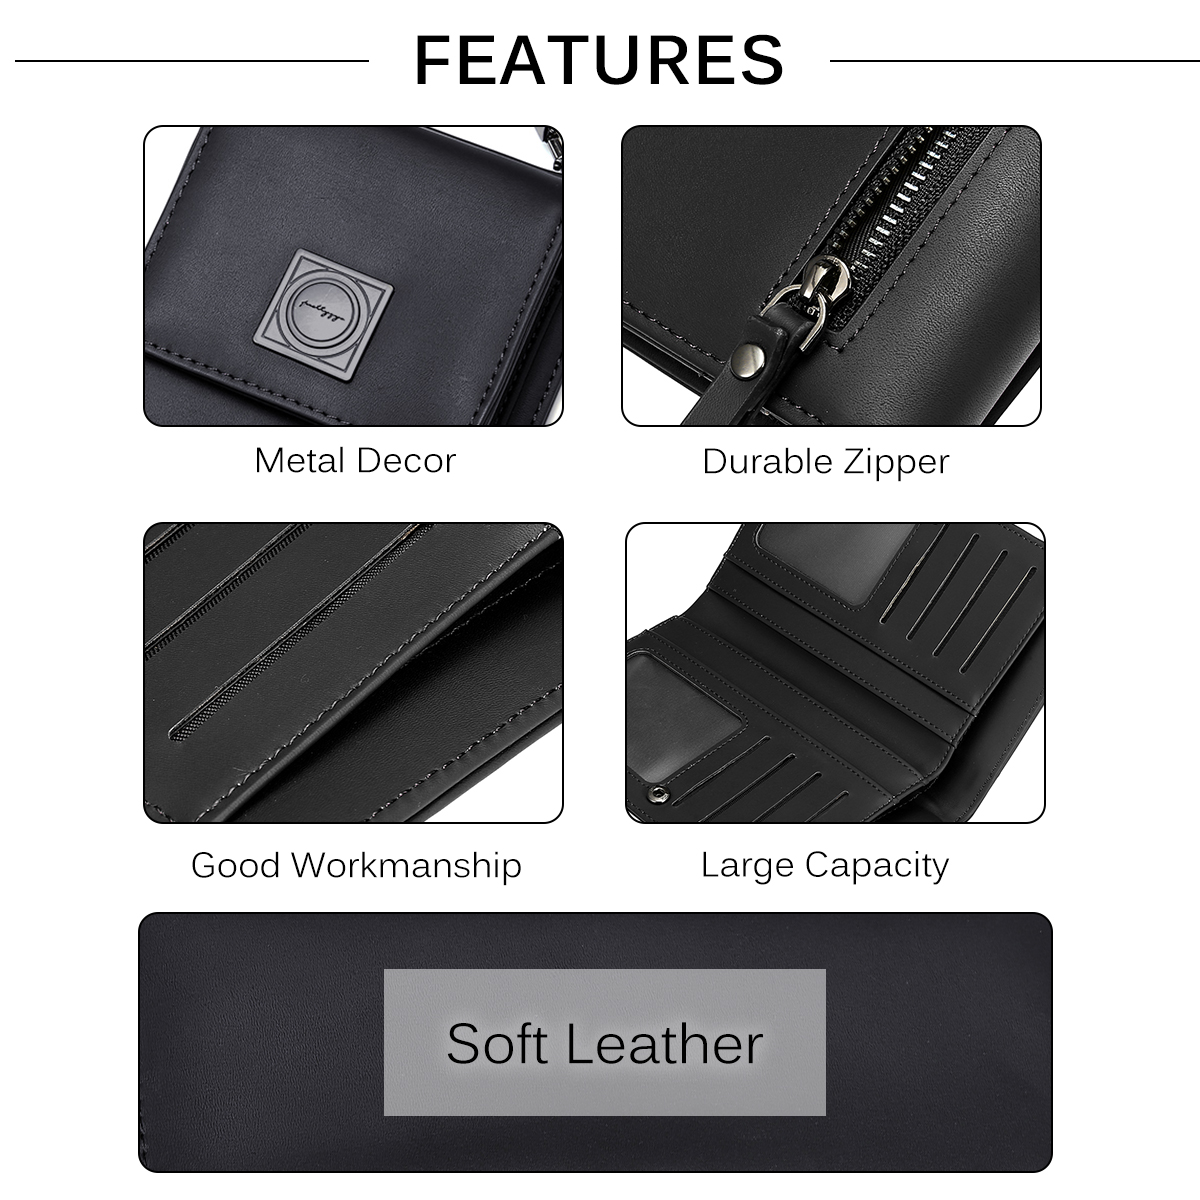 Fashion-Folding-with-Multi-Card-Slots-PU-Leather-Wallet-Purse-Mobile-Phone-Storage-Shoulder-Bag-1868718-12